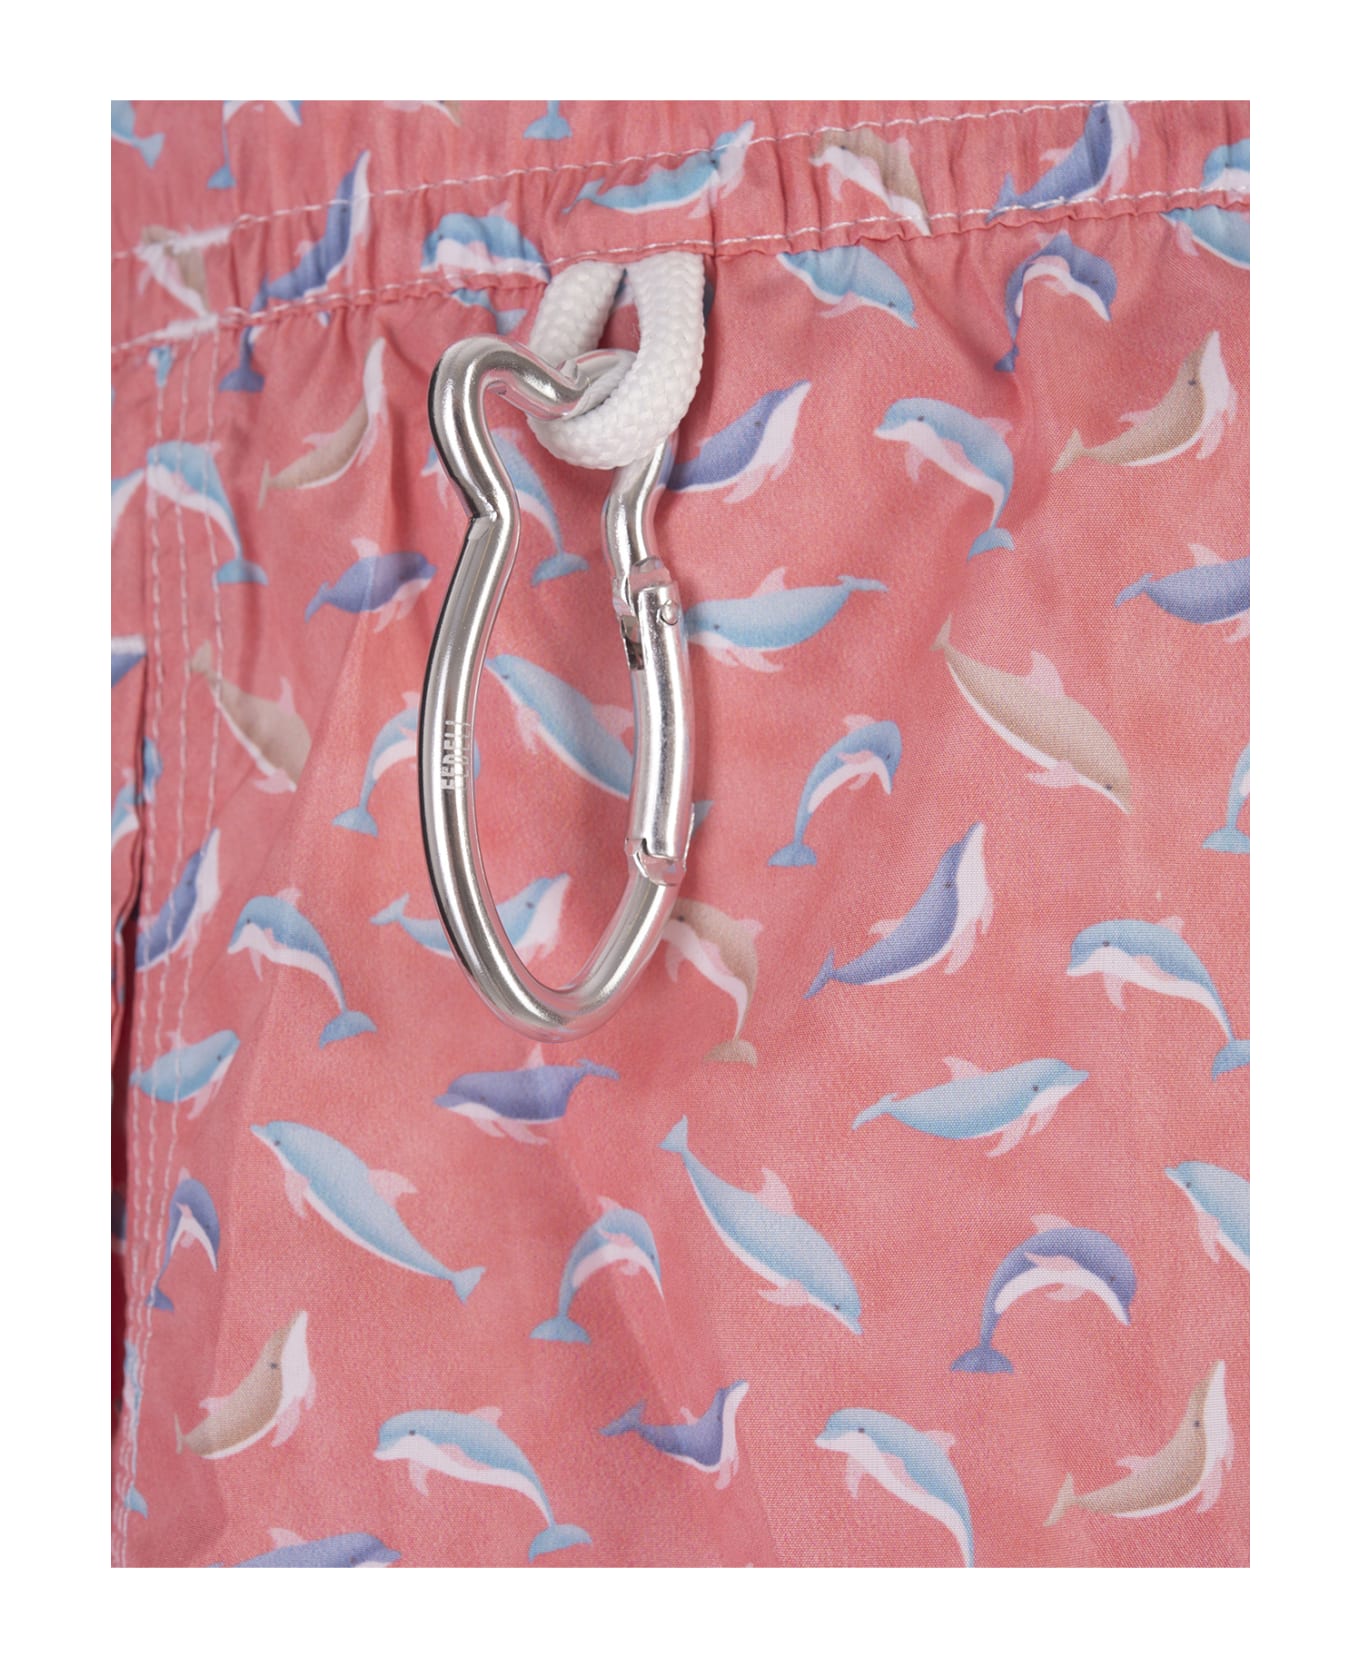 Fedeli Red Swim Shorts With Blue Dolphin Pattern - Red スイムトランクス